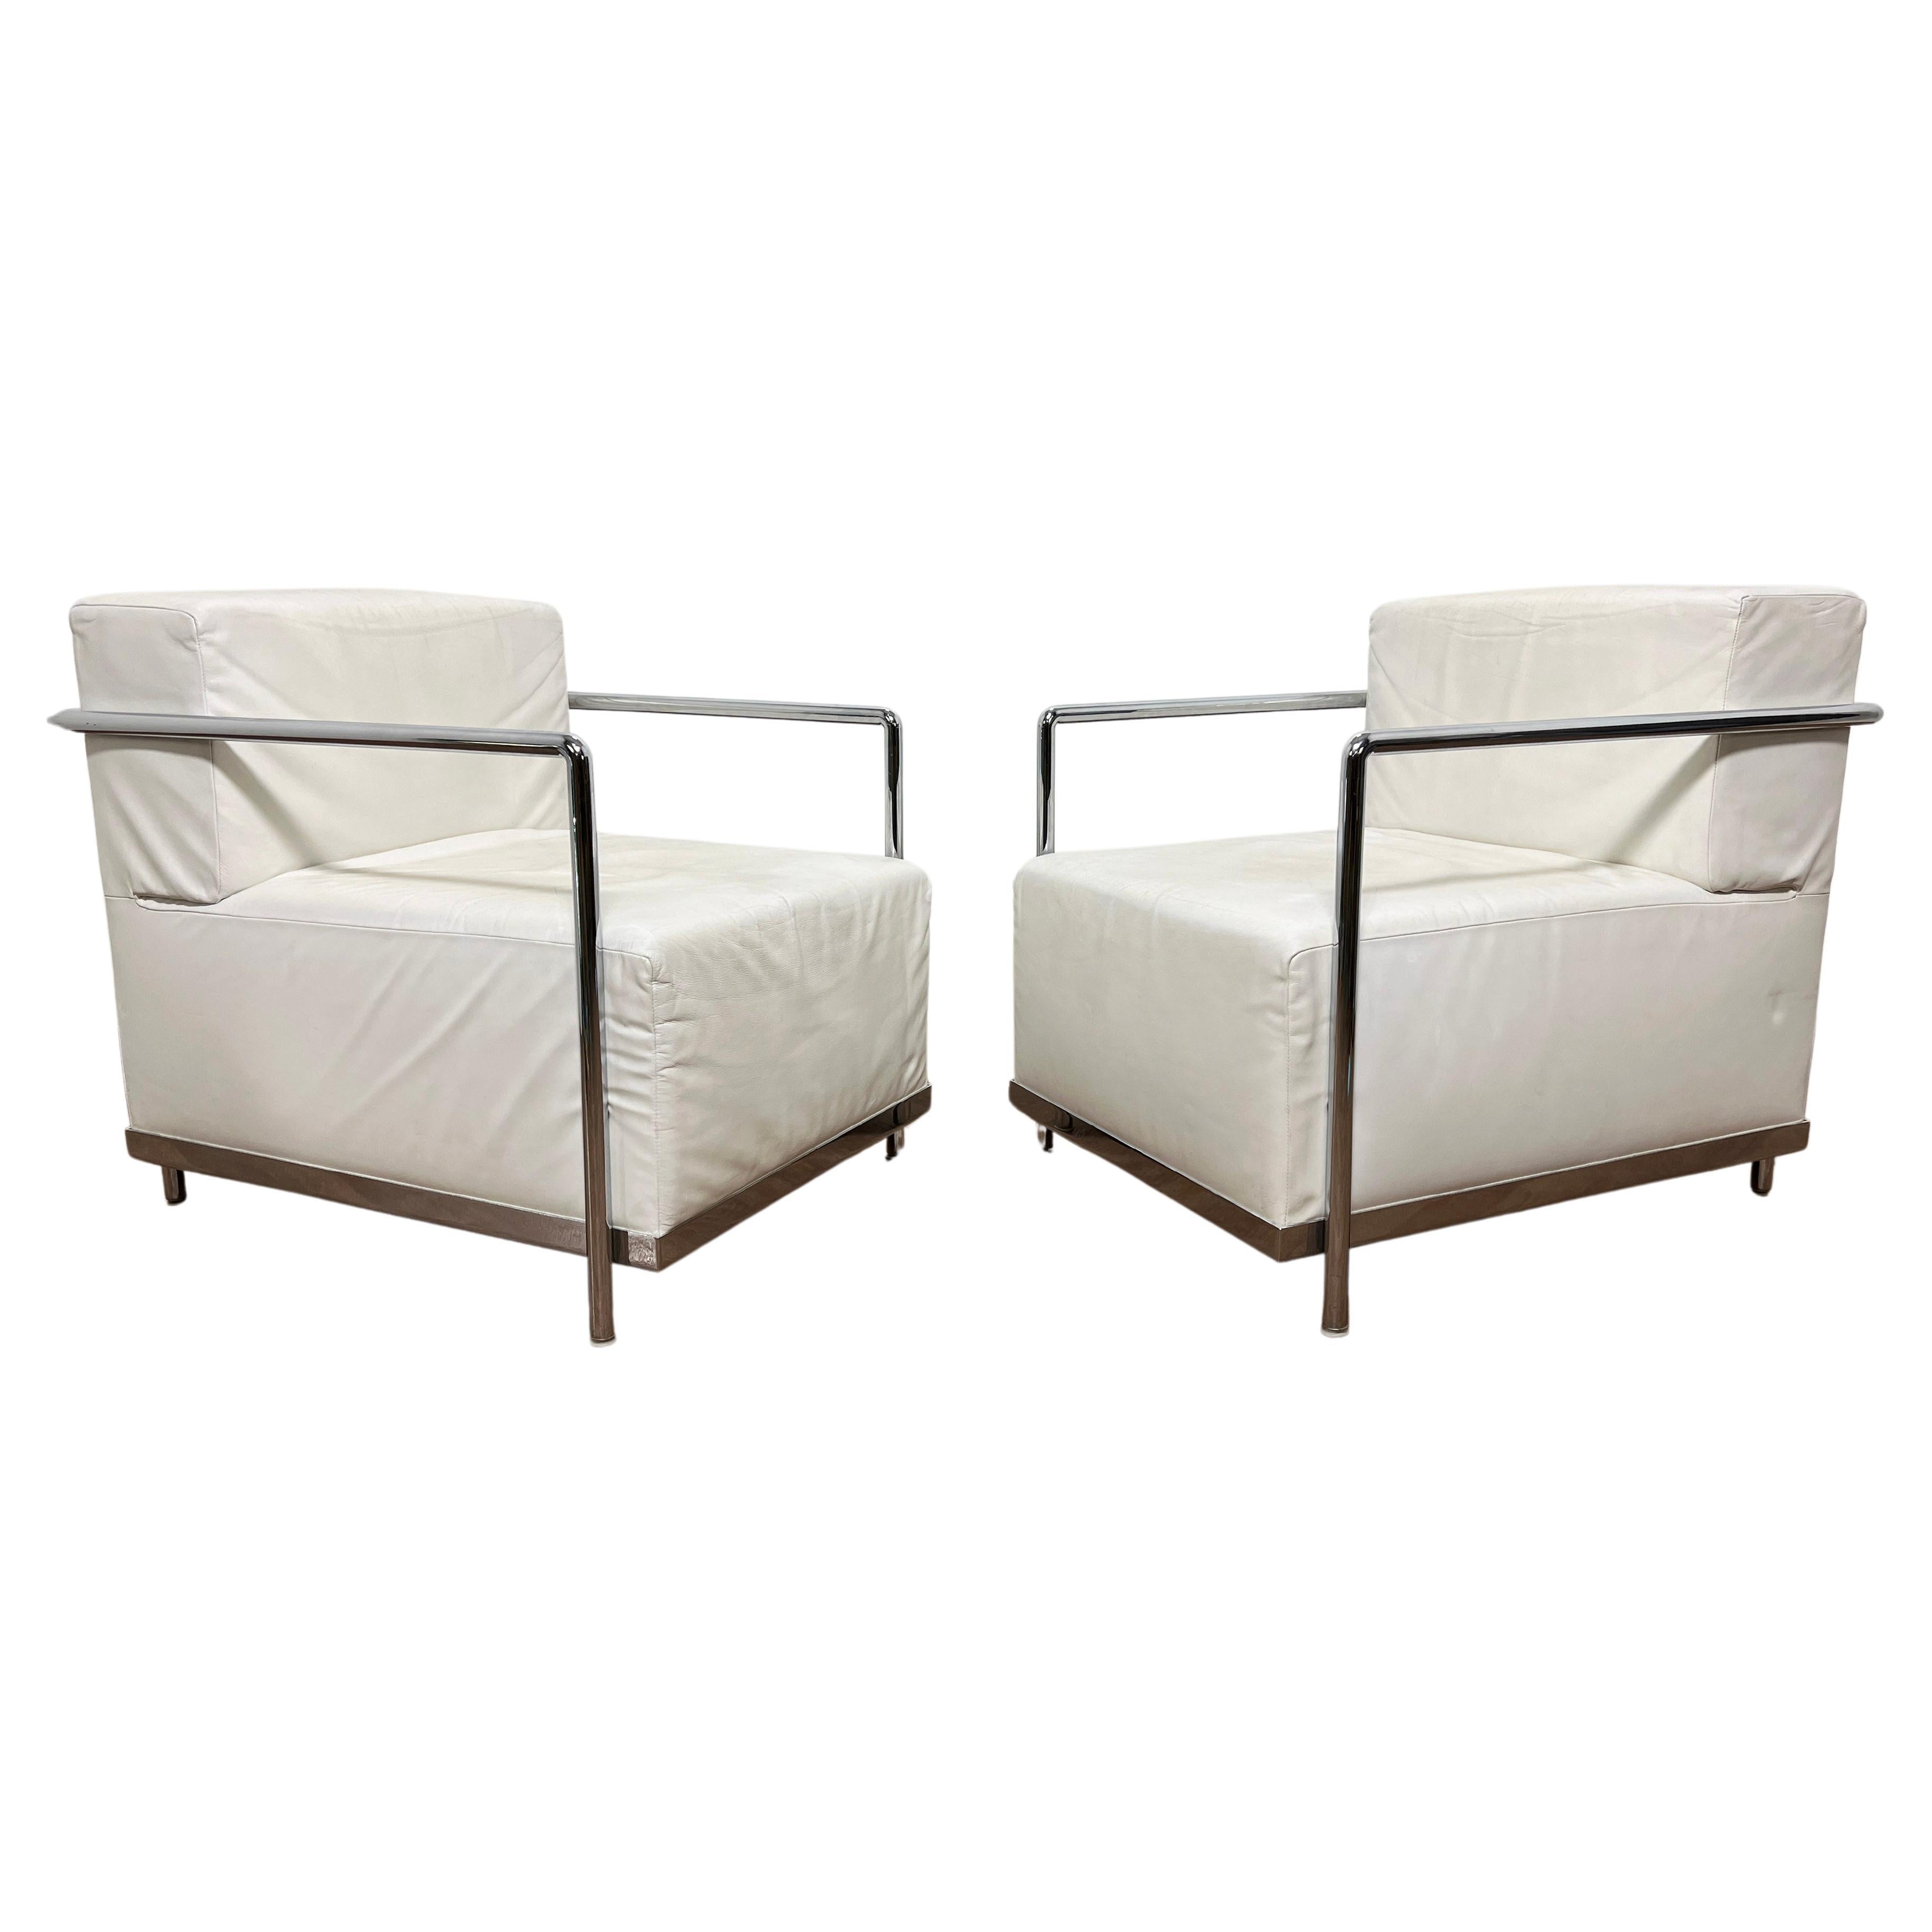 Pair of Post Modern Bauhaus Style Leather and Chrome Lounge Chairs by Bernhardt For Sale